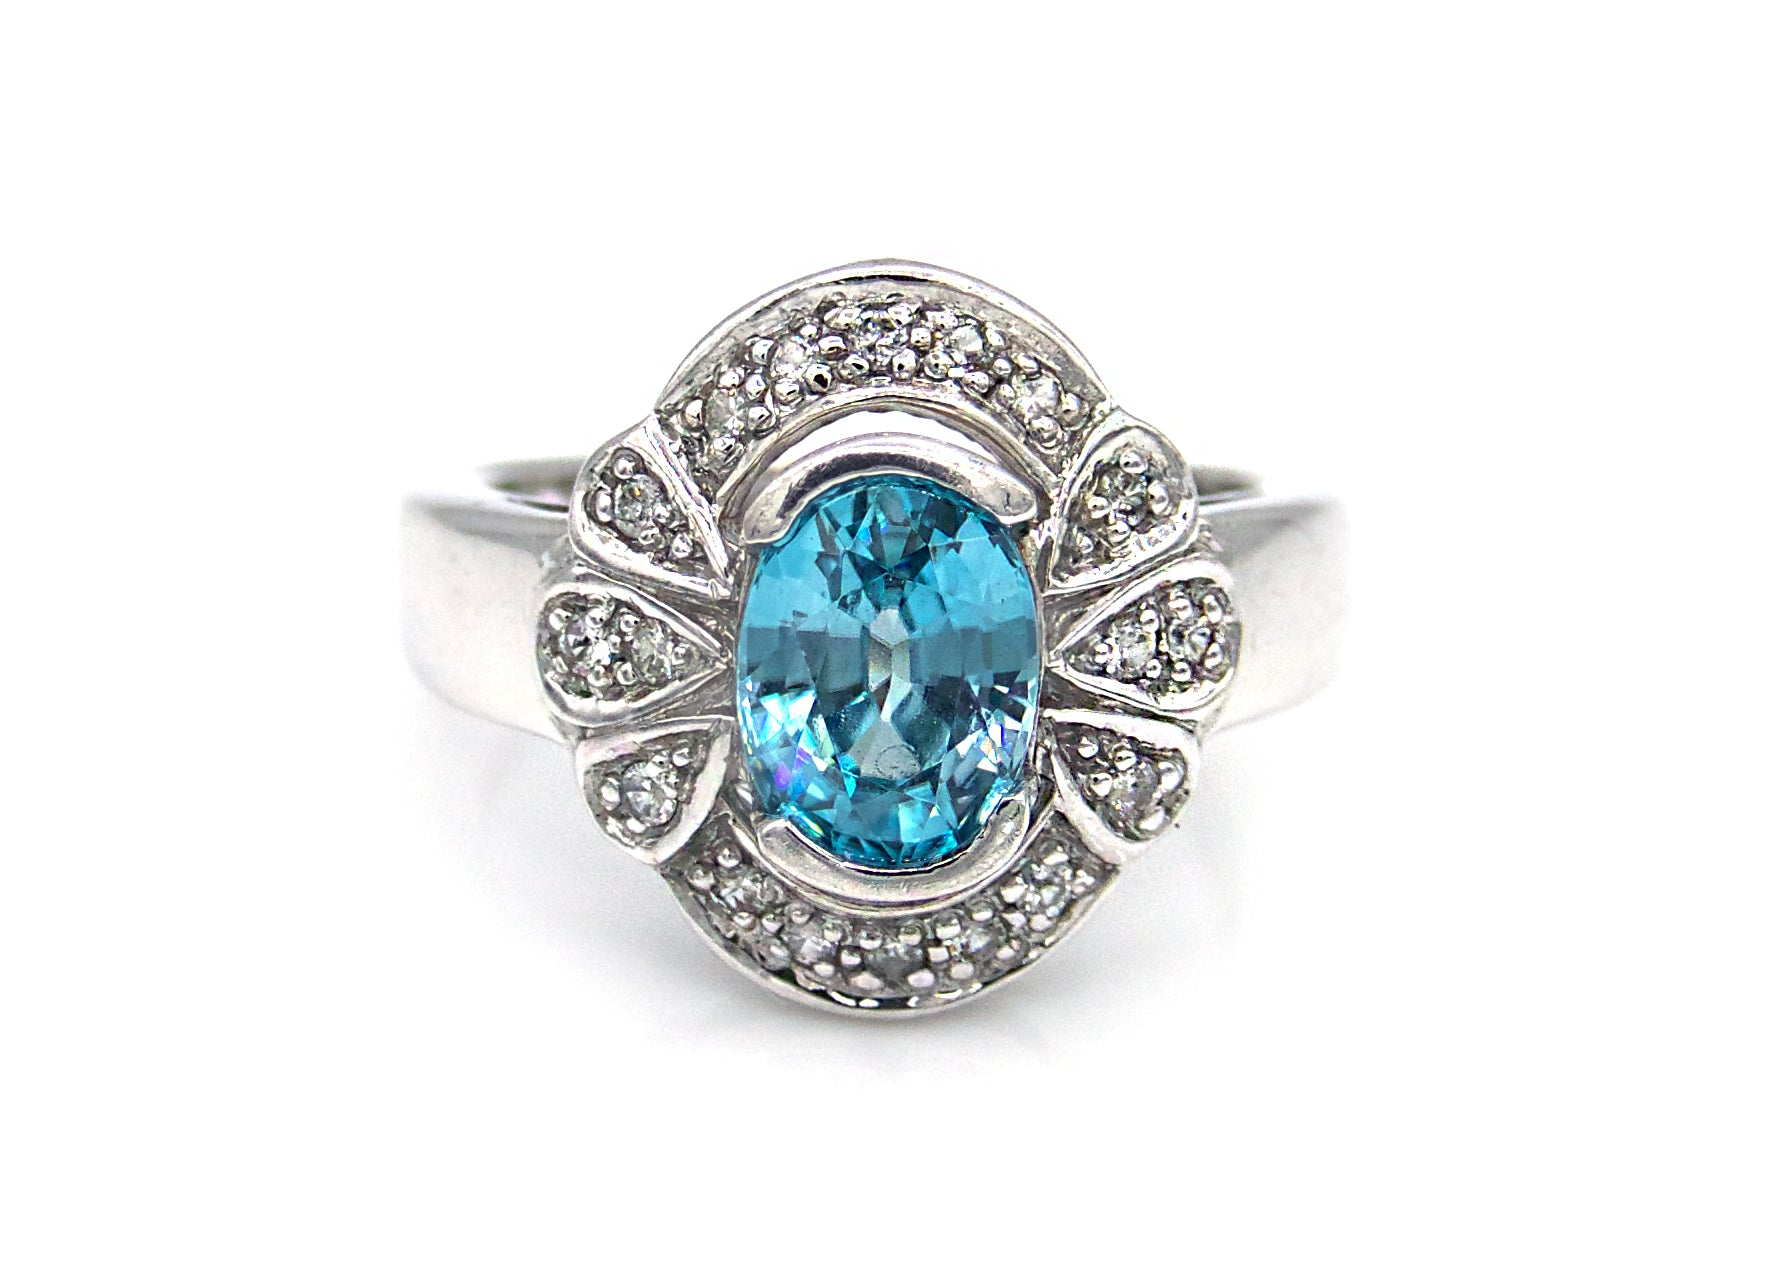 Blue Zircon and Diamond White Gold Antique Style Ring